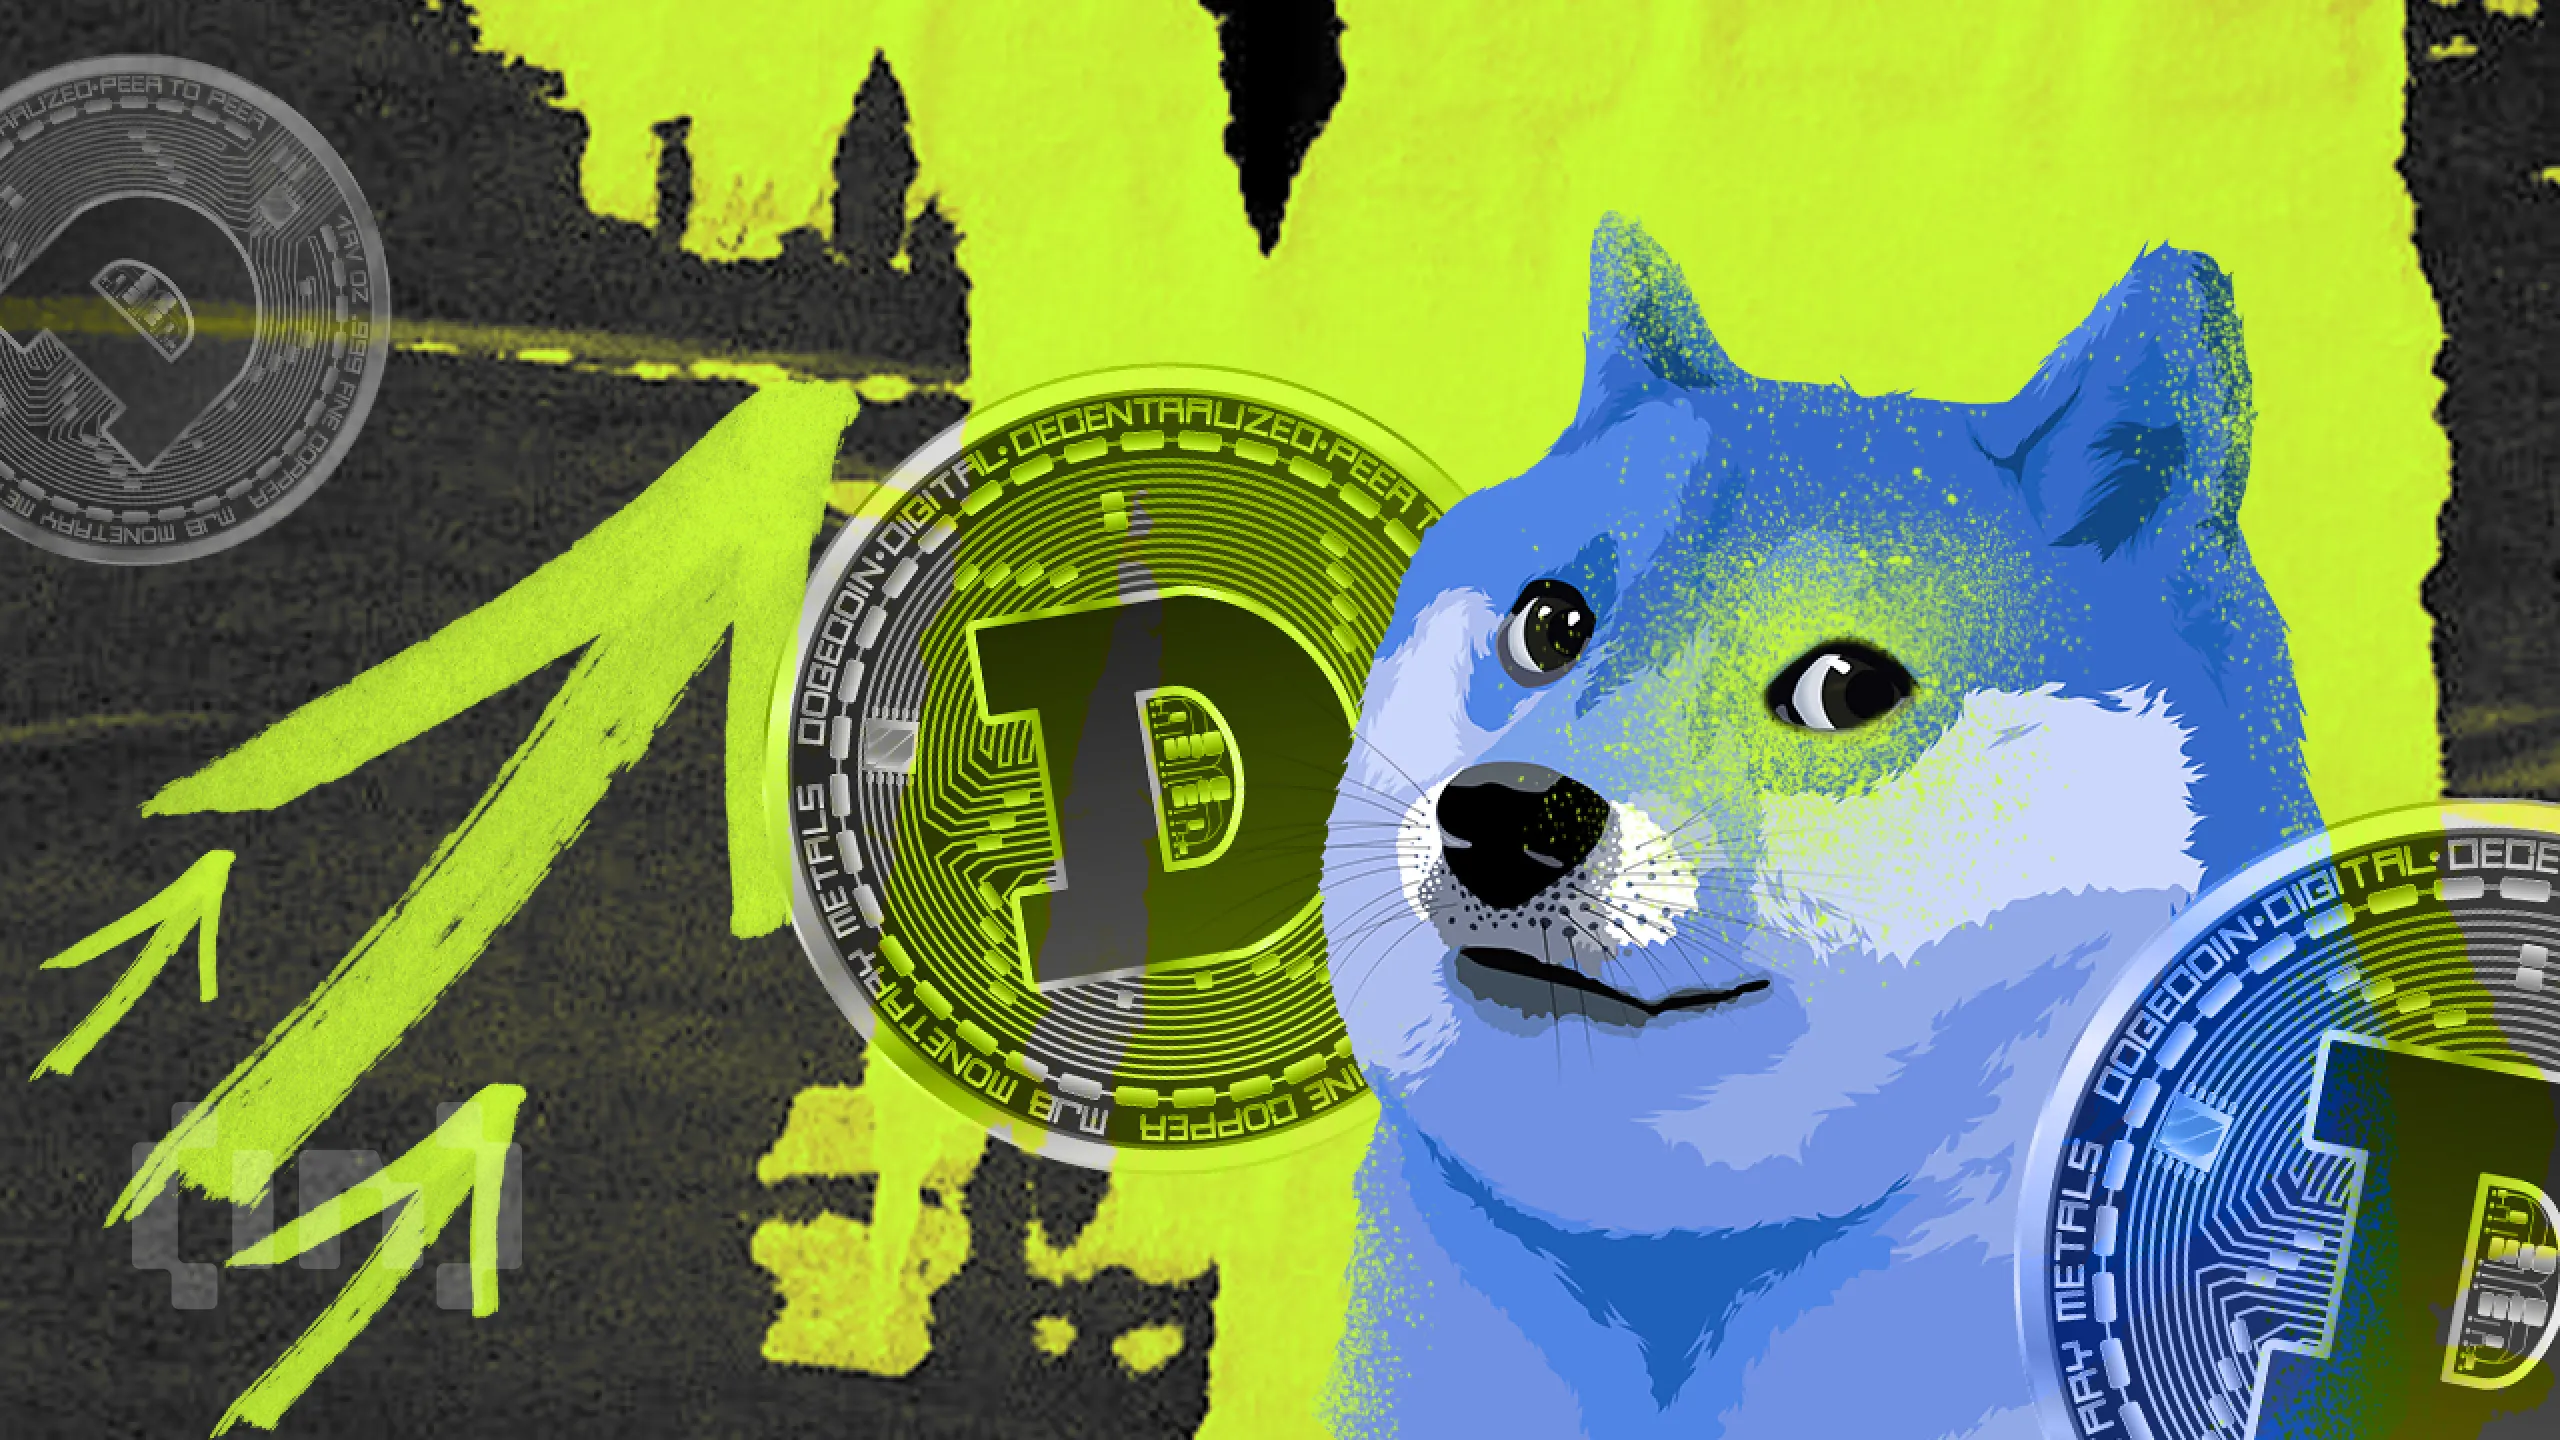 Keith moved 300 million Dogecoin to Robinhood: what should DOGE holders prepare for?